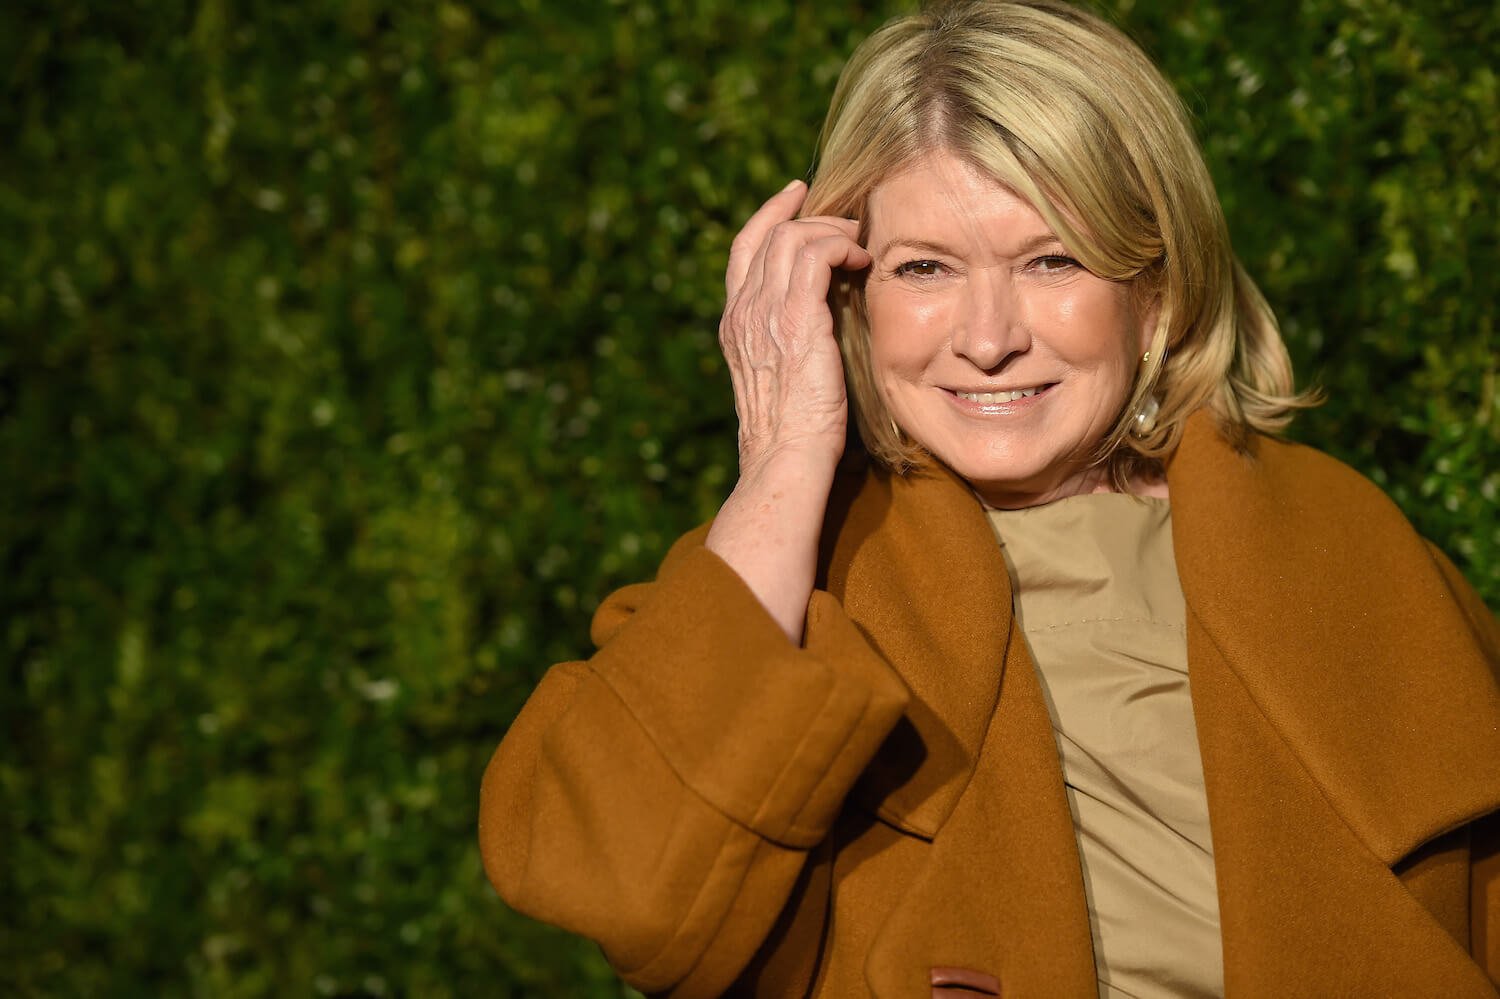 Martha Stewart smiling and tucking her hair behind her ear against a grassy background